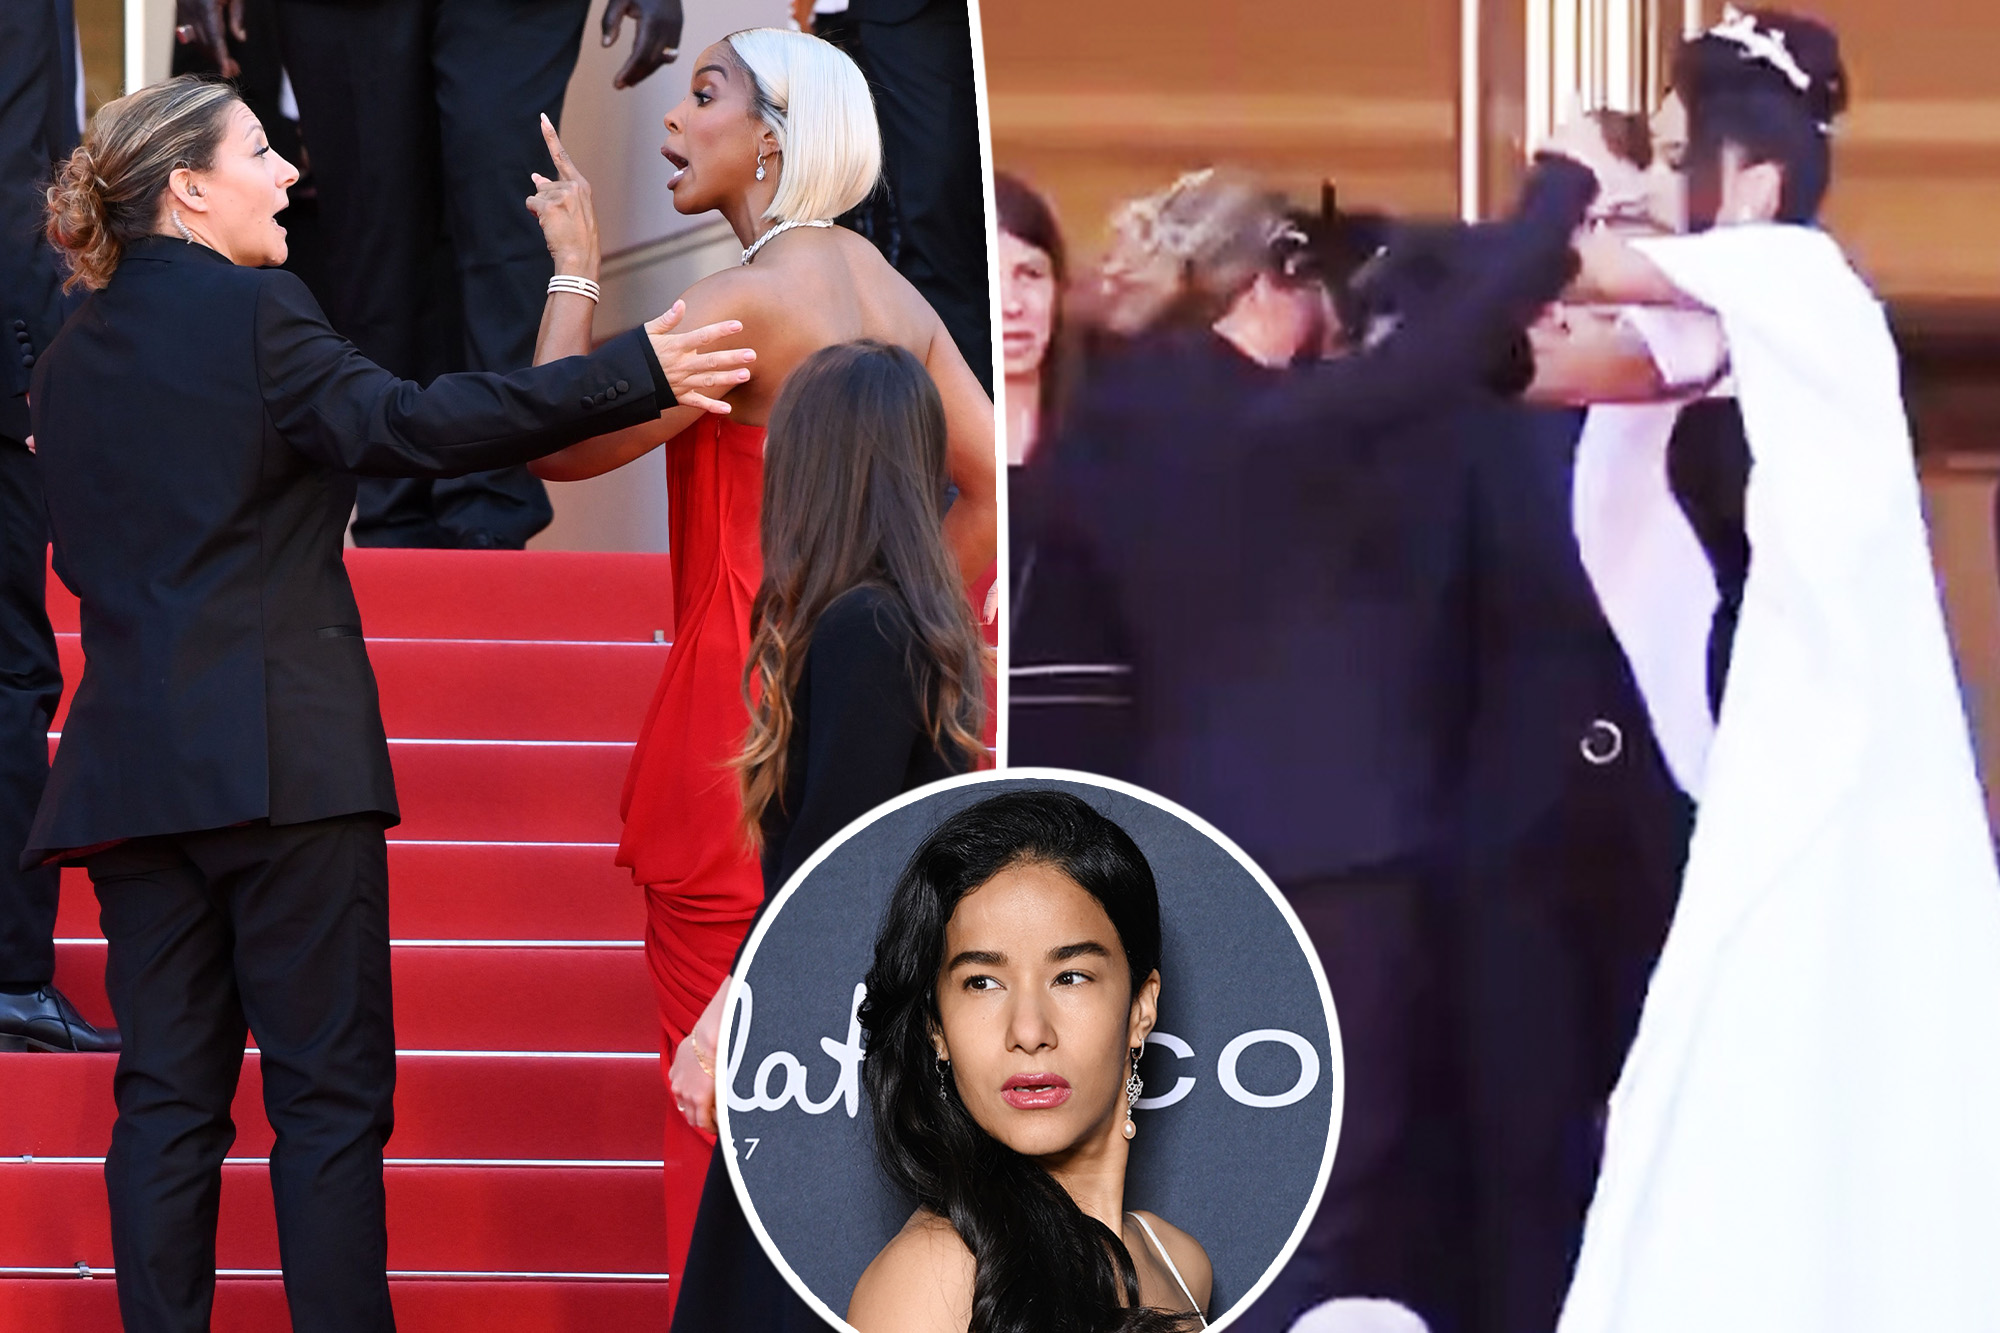 Actress Massiel Taveras Shoves Cannes Security Guard in Another Heated Incident